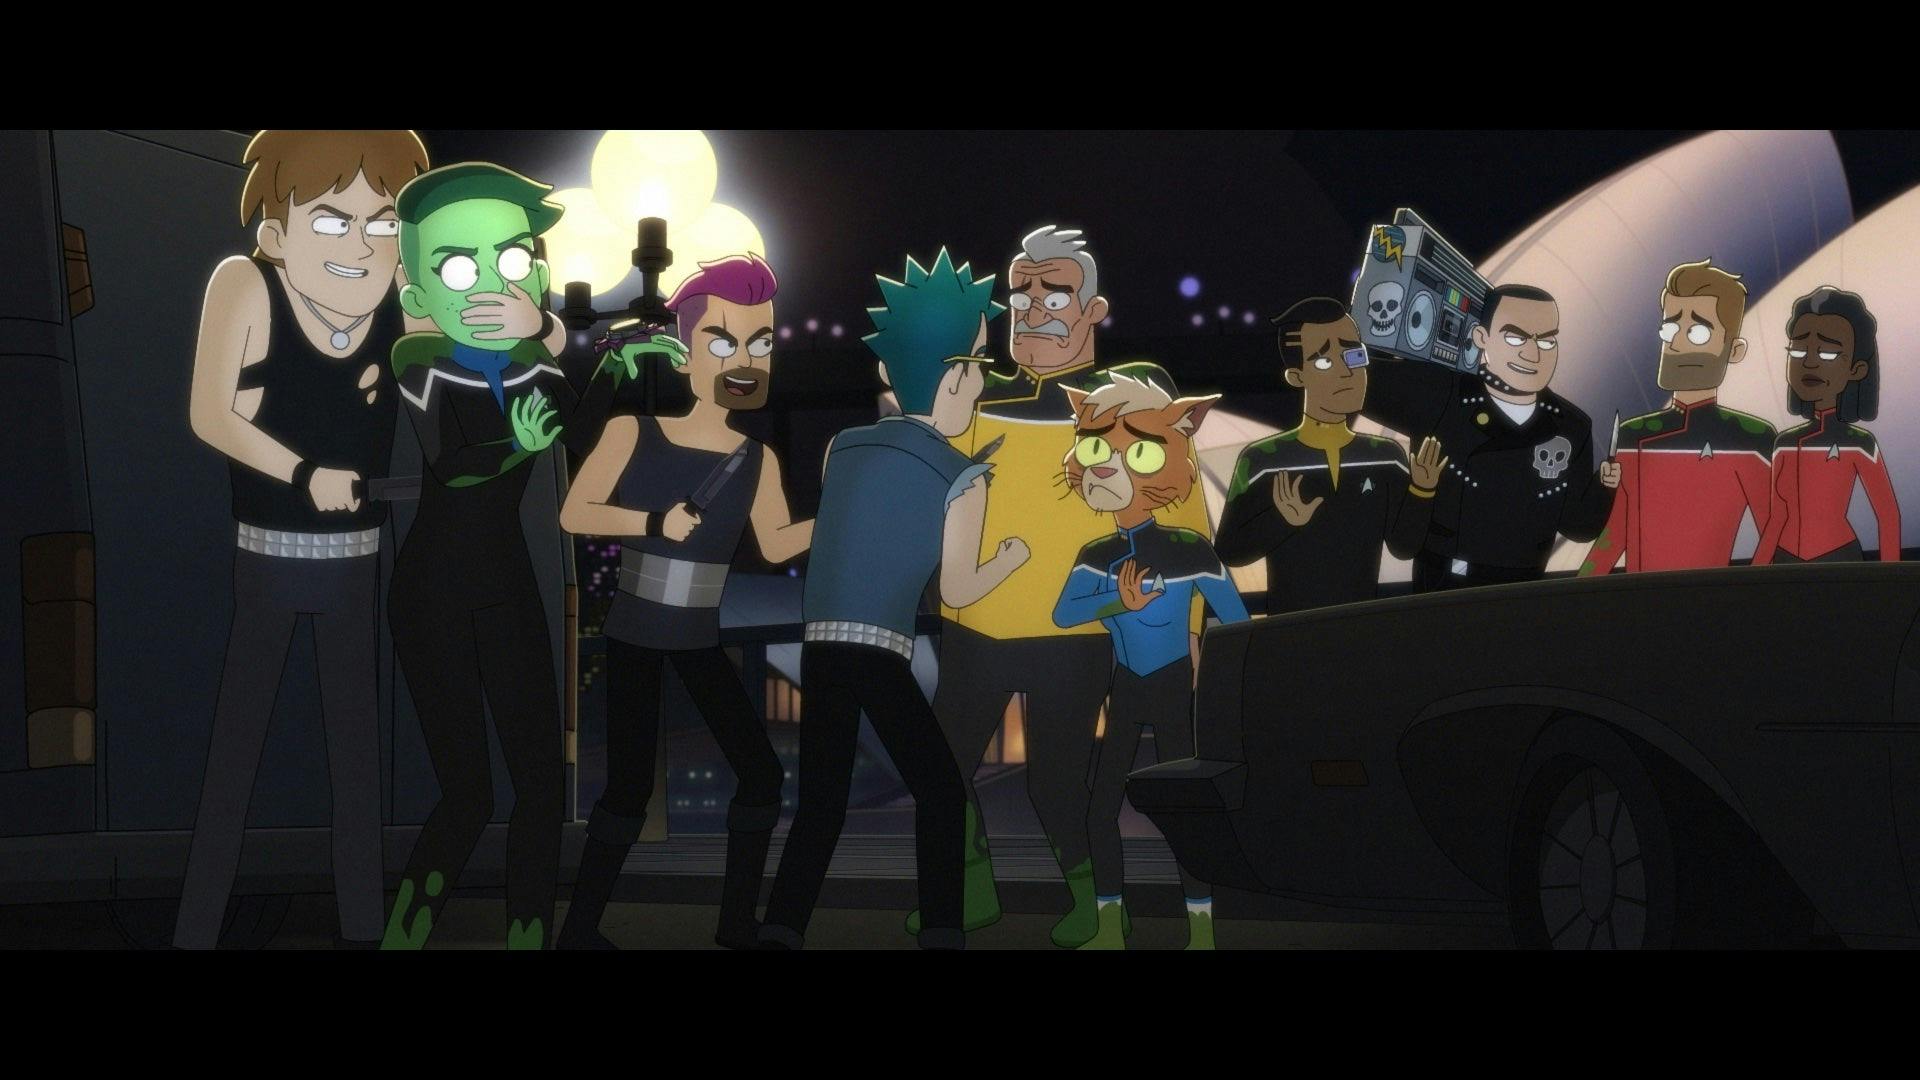 Tendi and the bridge crew are attacked by present day punks.